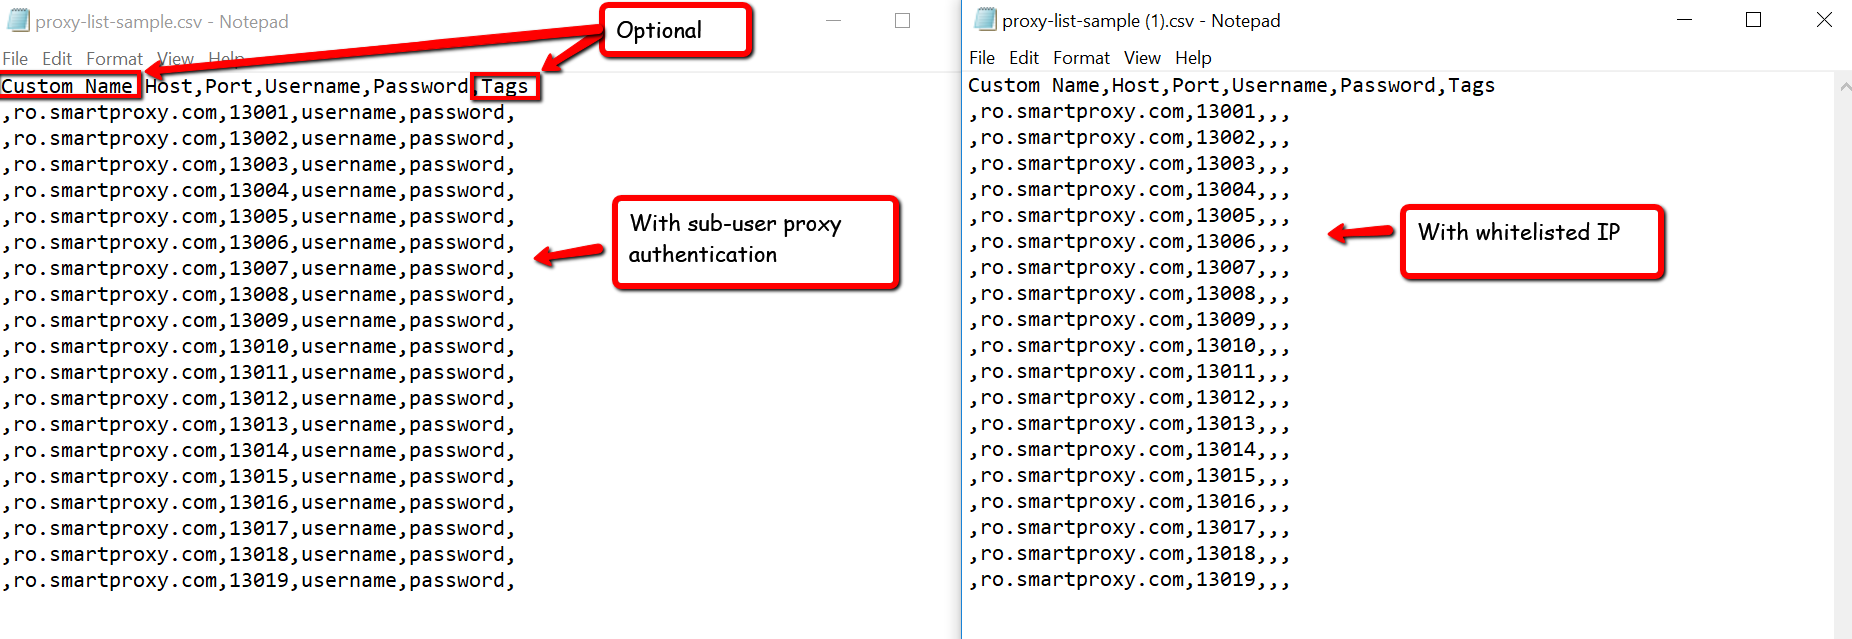 Ghost Browser proxy list sample in CSV format